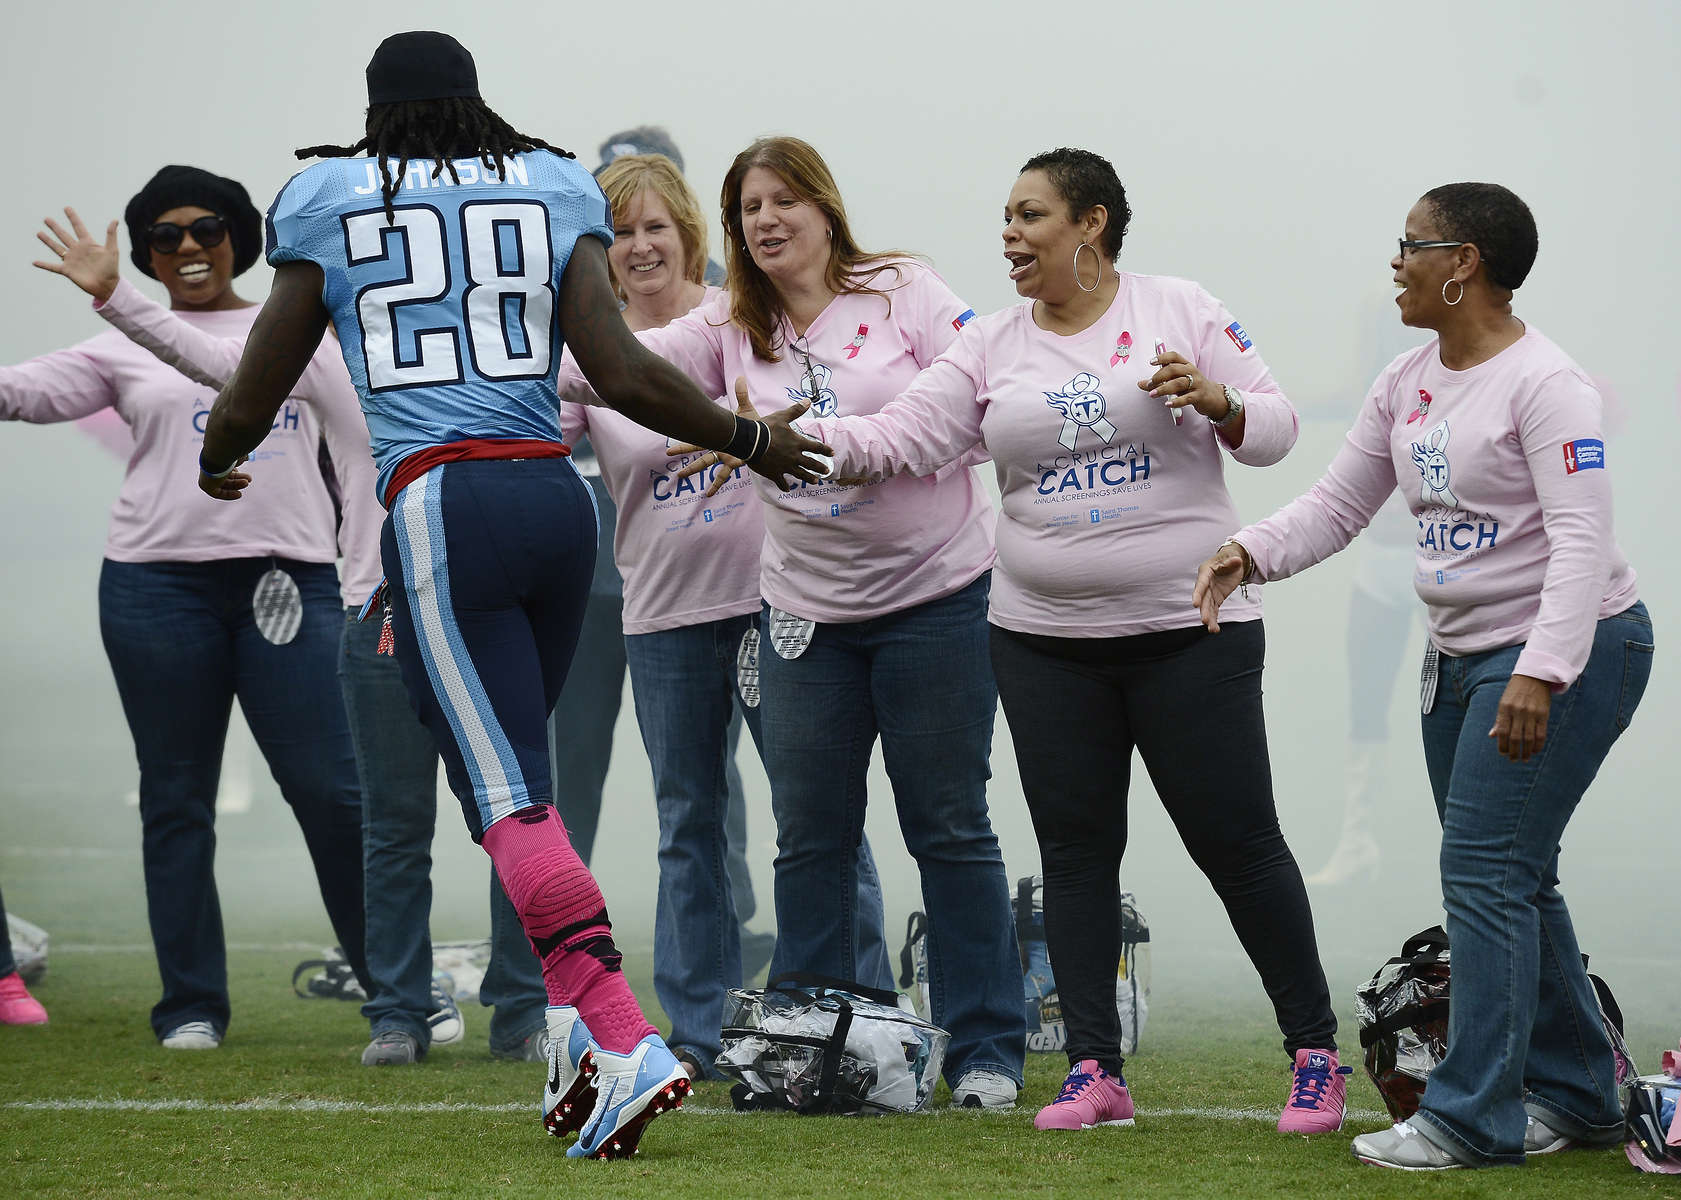 Tennessee Titans running back Chris Johnson slaps hands with breast cancer survivors as heis introduced before an NFL football game between the Titans andthe Kansas City Chiefs on Oct. 6, 2013, in Nashville, Tenn. (AP Photo/ Mark Zaleski)